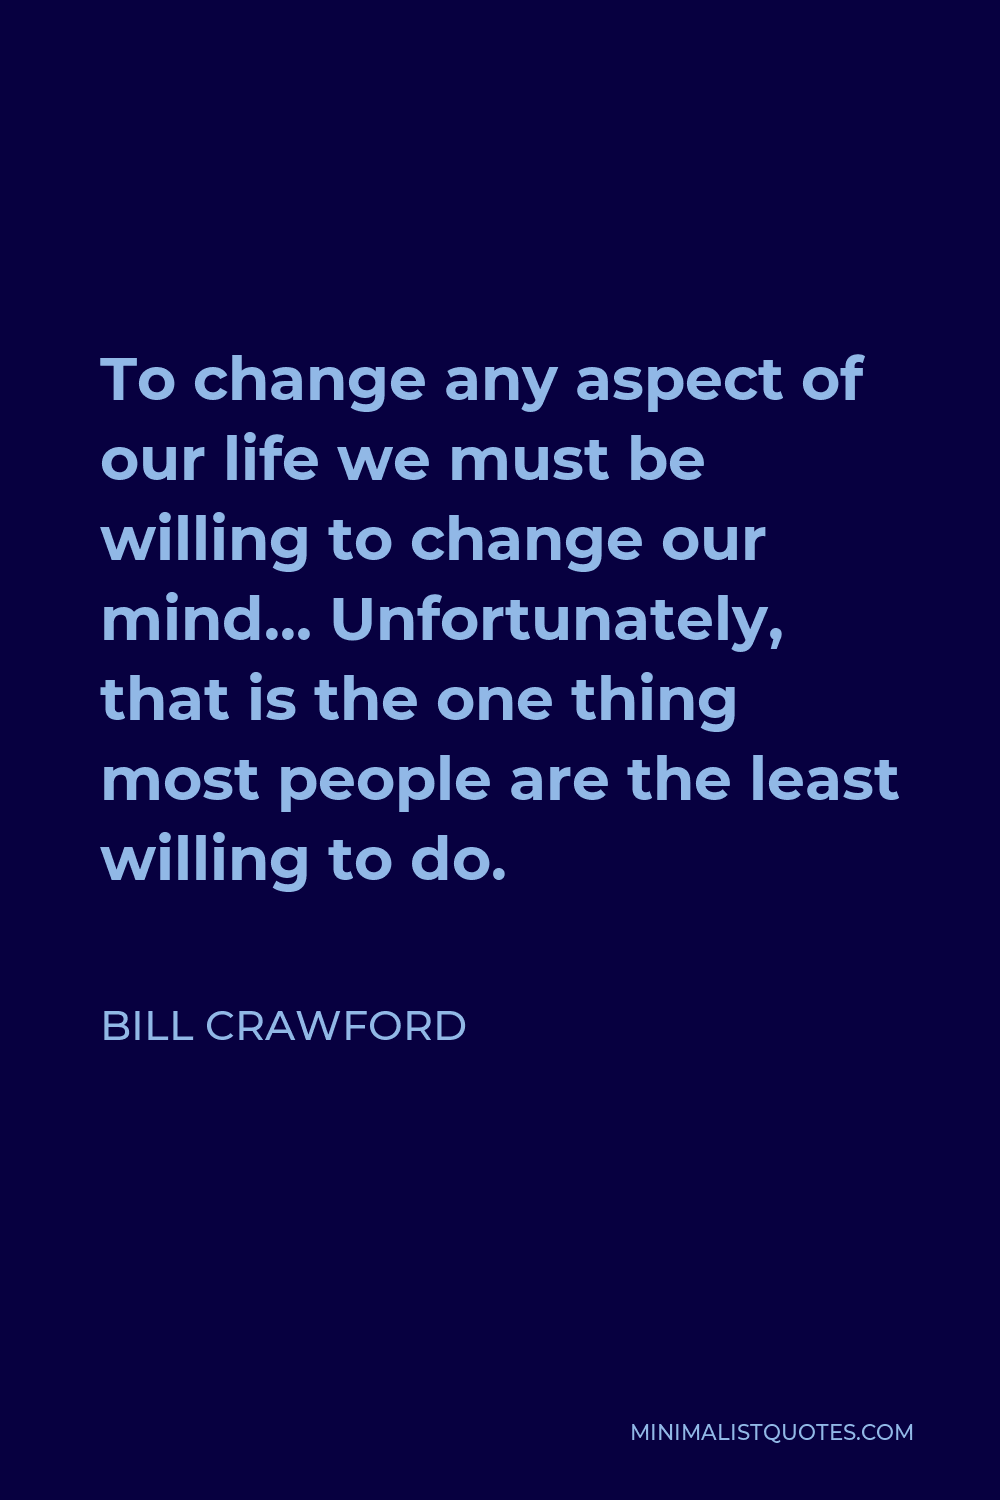 Bill Crawford Quote - To change any aspect of our life we must be willing to change our mind… Unfortunately, that is the one thing most people are the least willing to do.